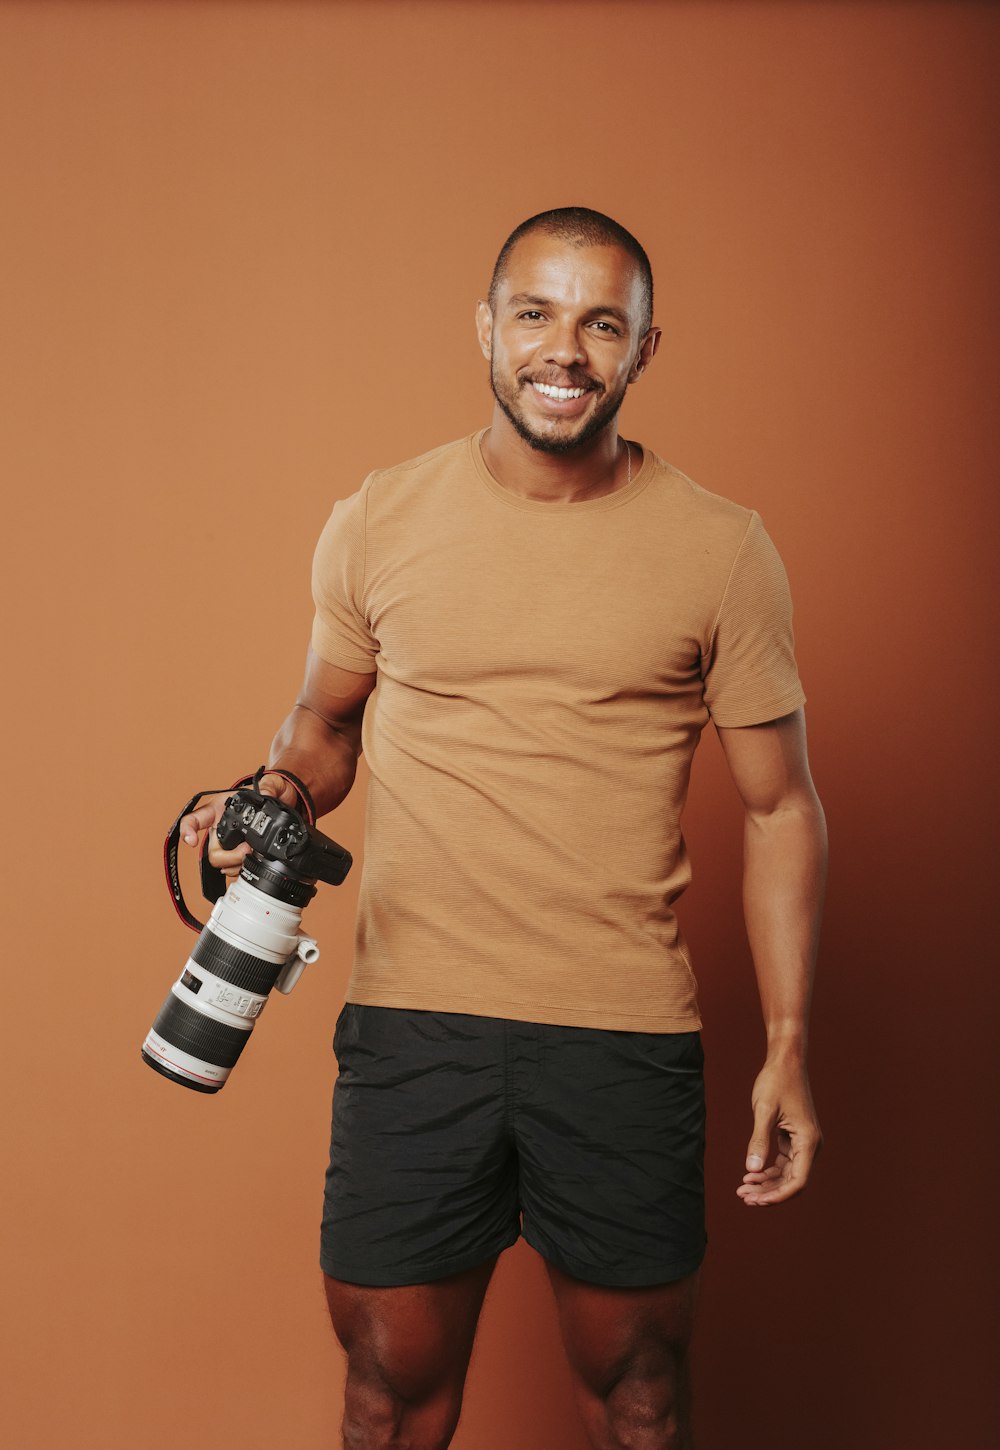 a man holding a camera and a water bottle